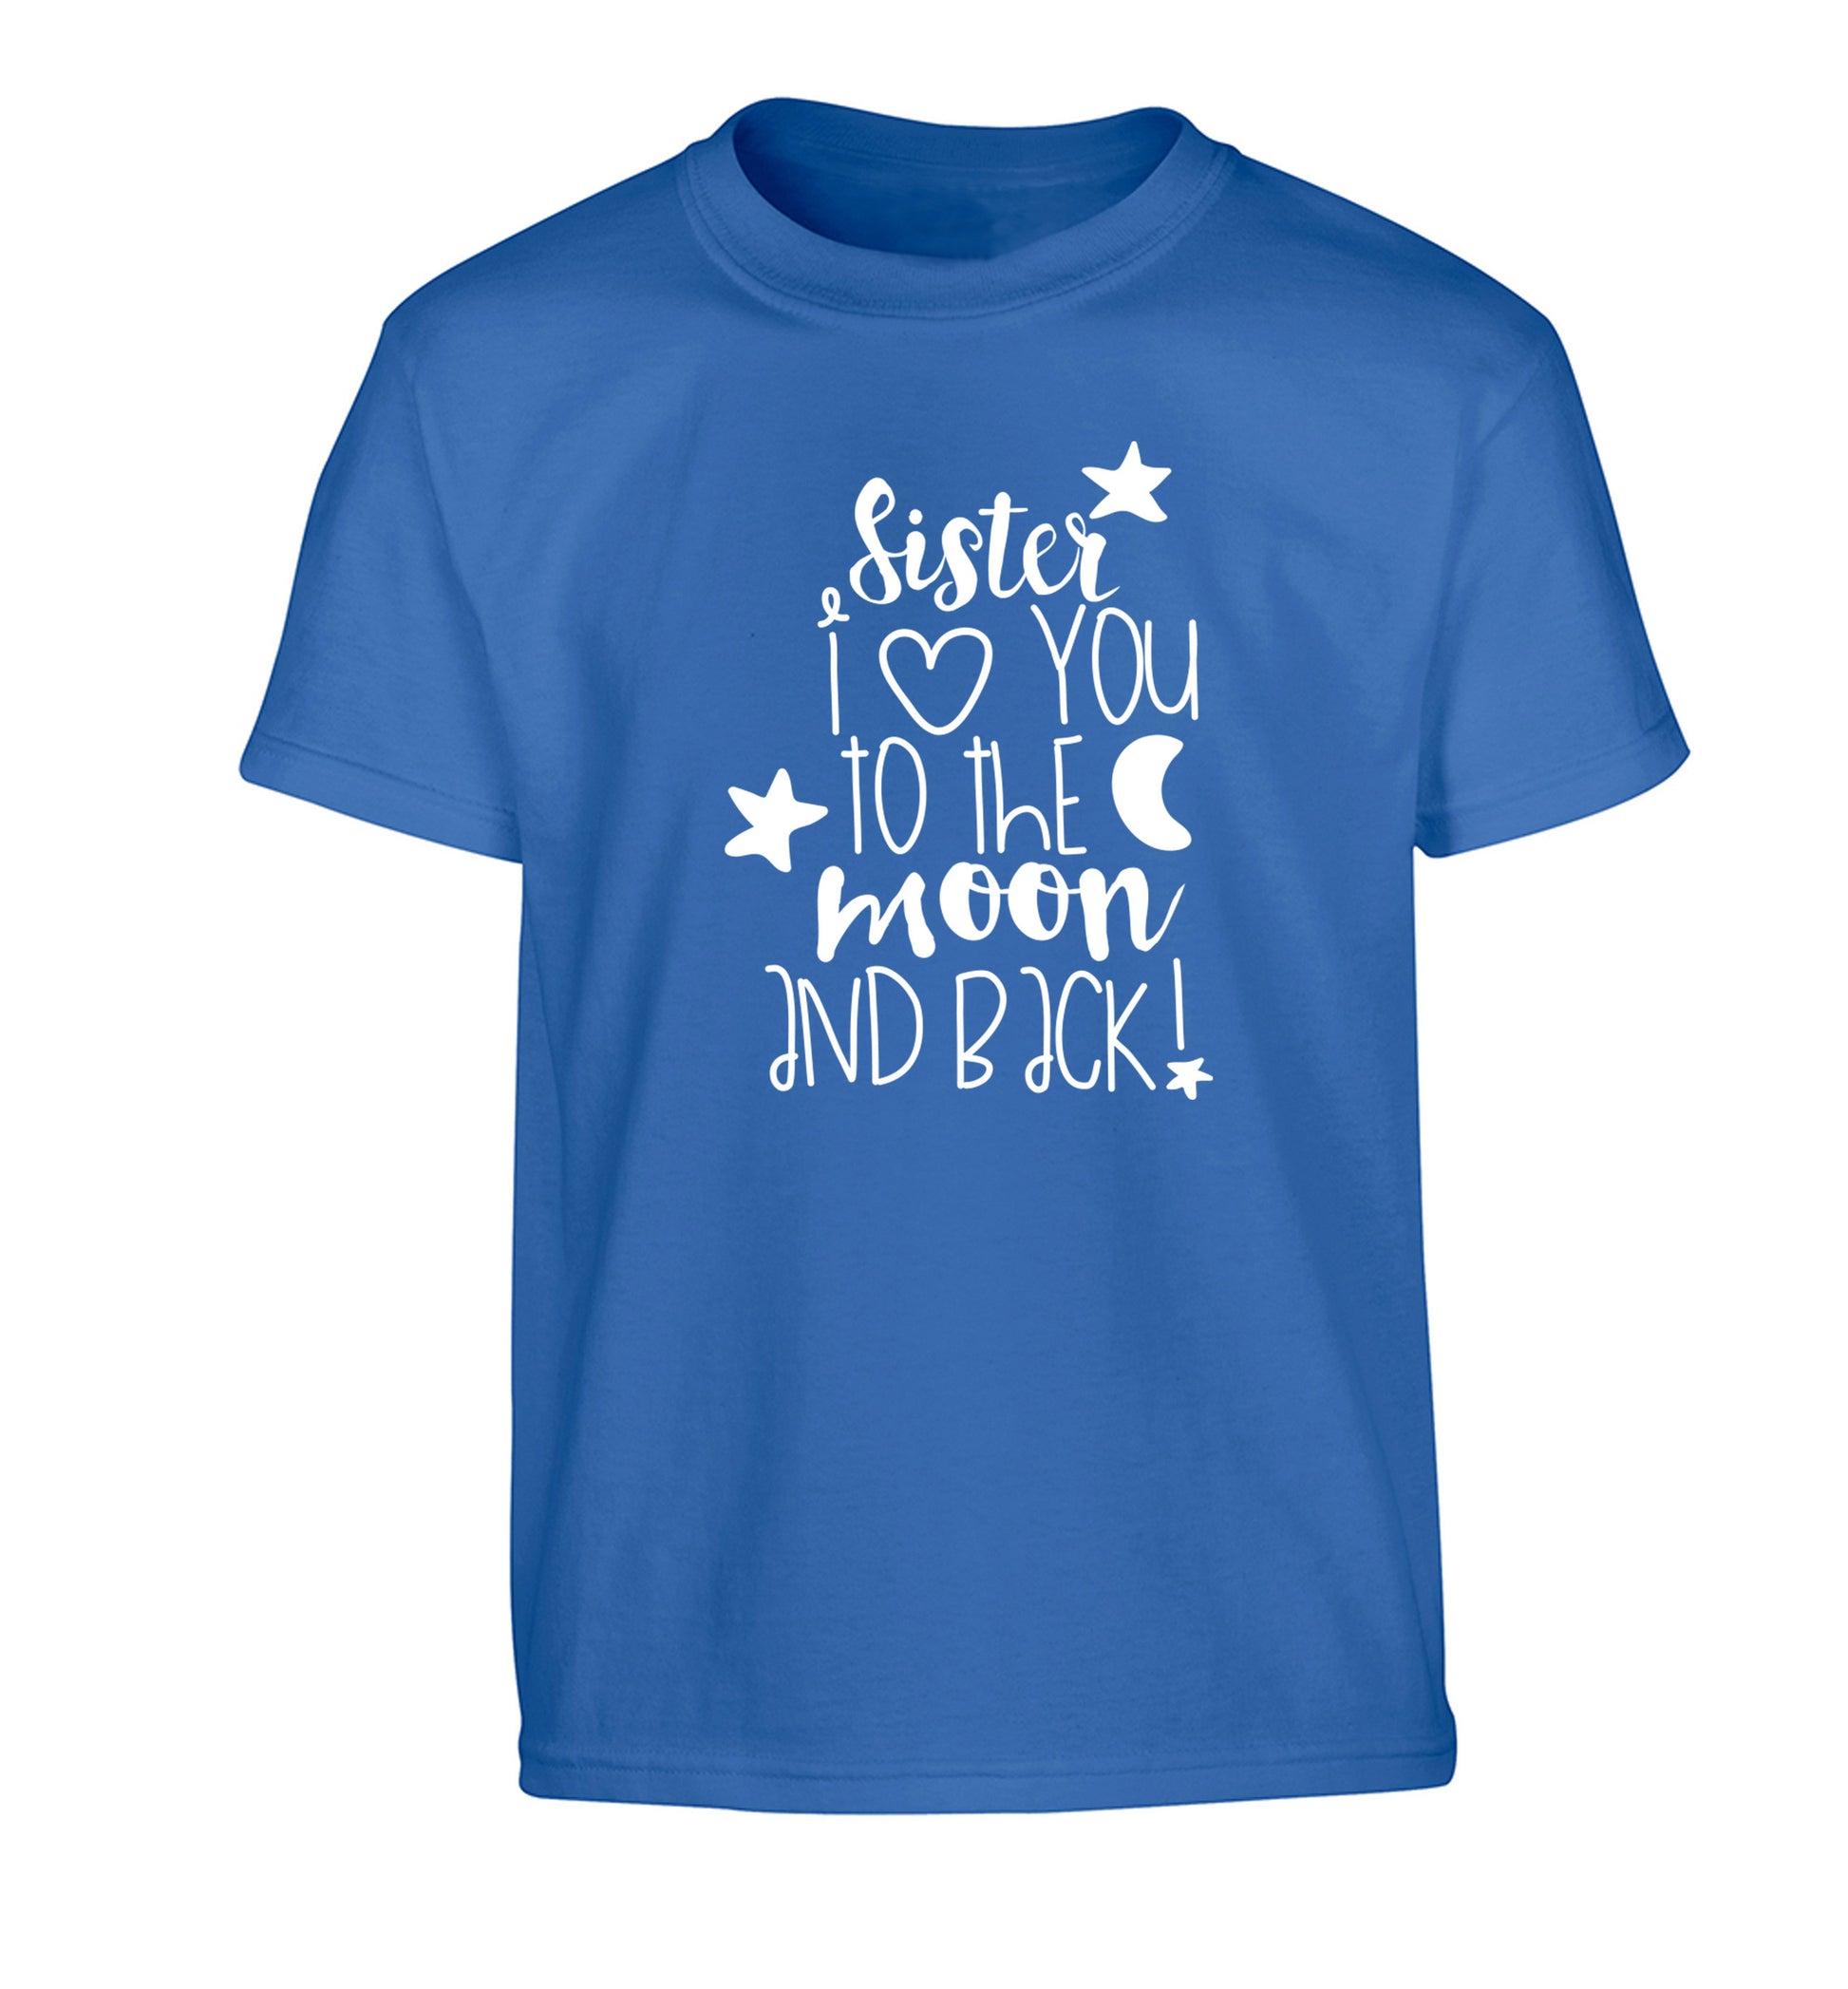 Sister I love you to the moon and back Children's blue Tshirt 12-14 Years